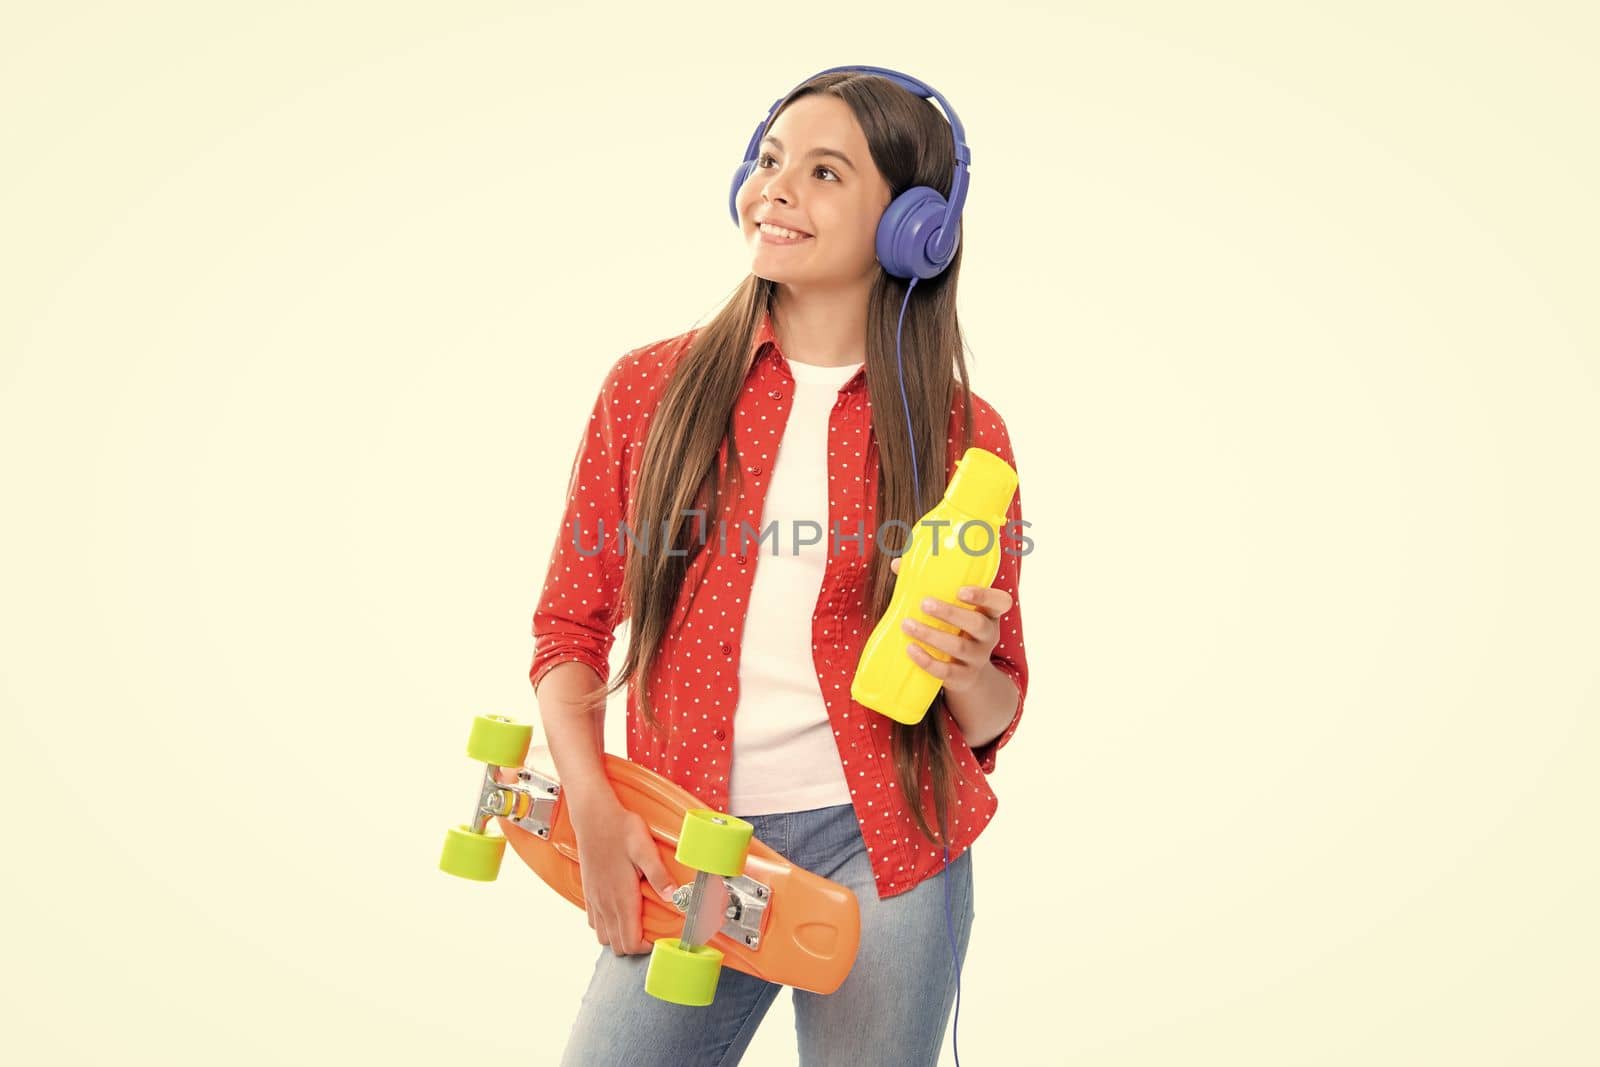 Teen girl 12, 13, 14 years old with skateboard and headphones over white studio background. Cool modern teenager in stylish clothes. Teenagers lifestyle, casual youth culture